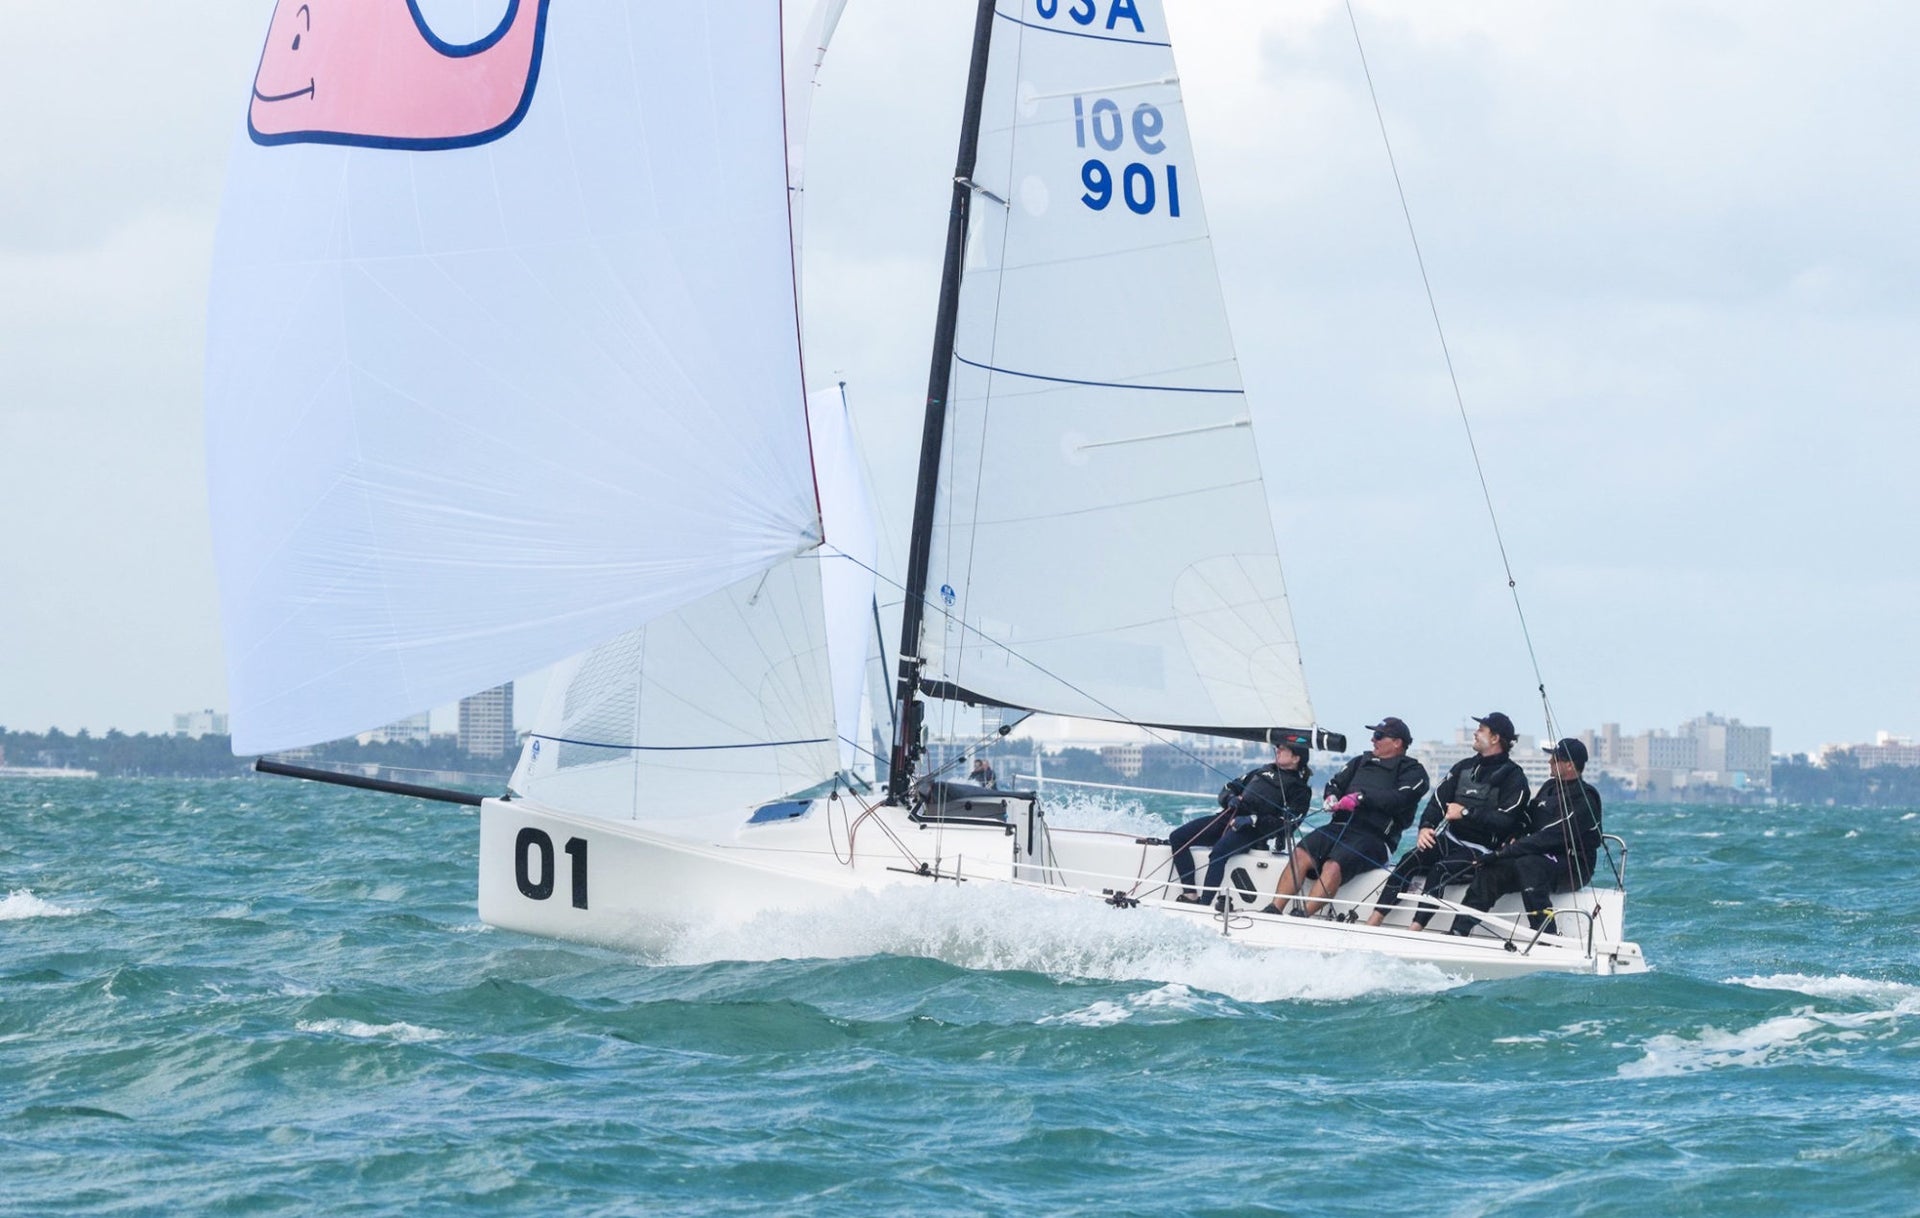 Baxters Prevail At The J/70 Midwinters